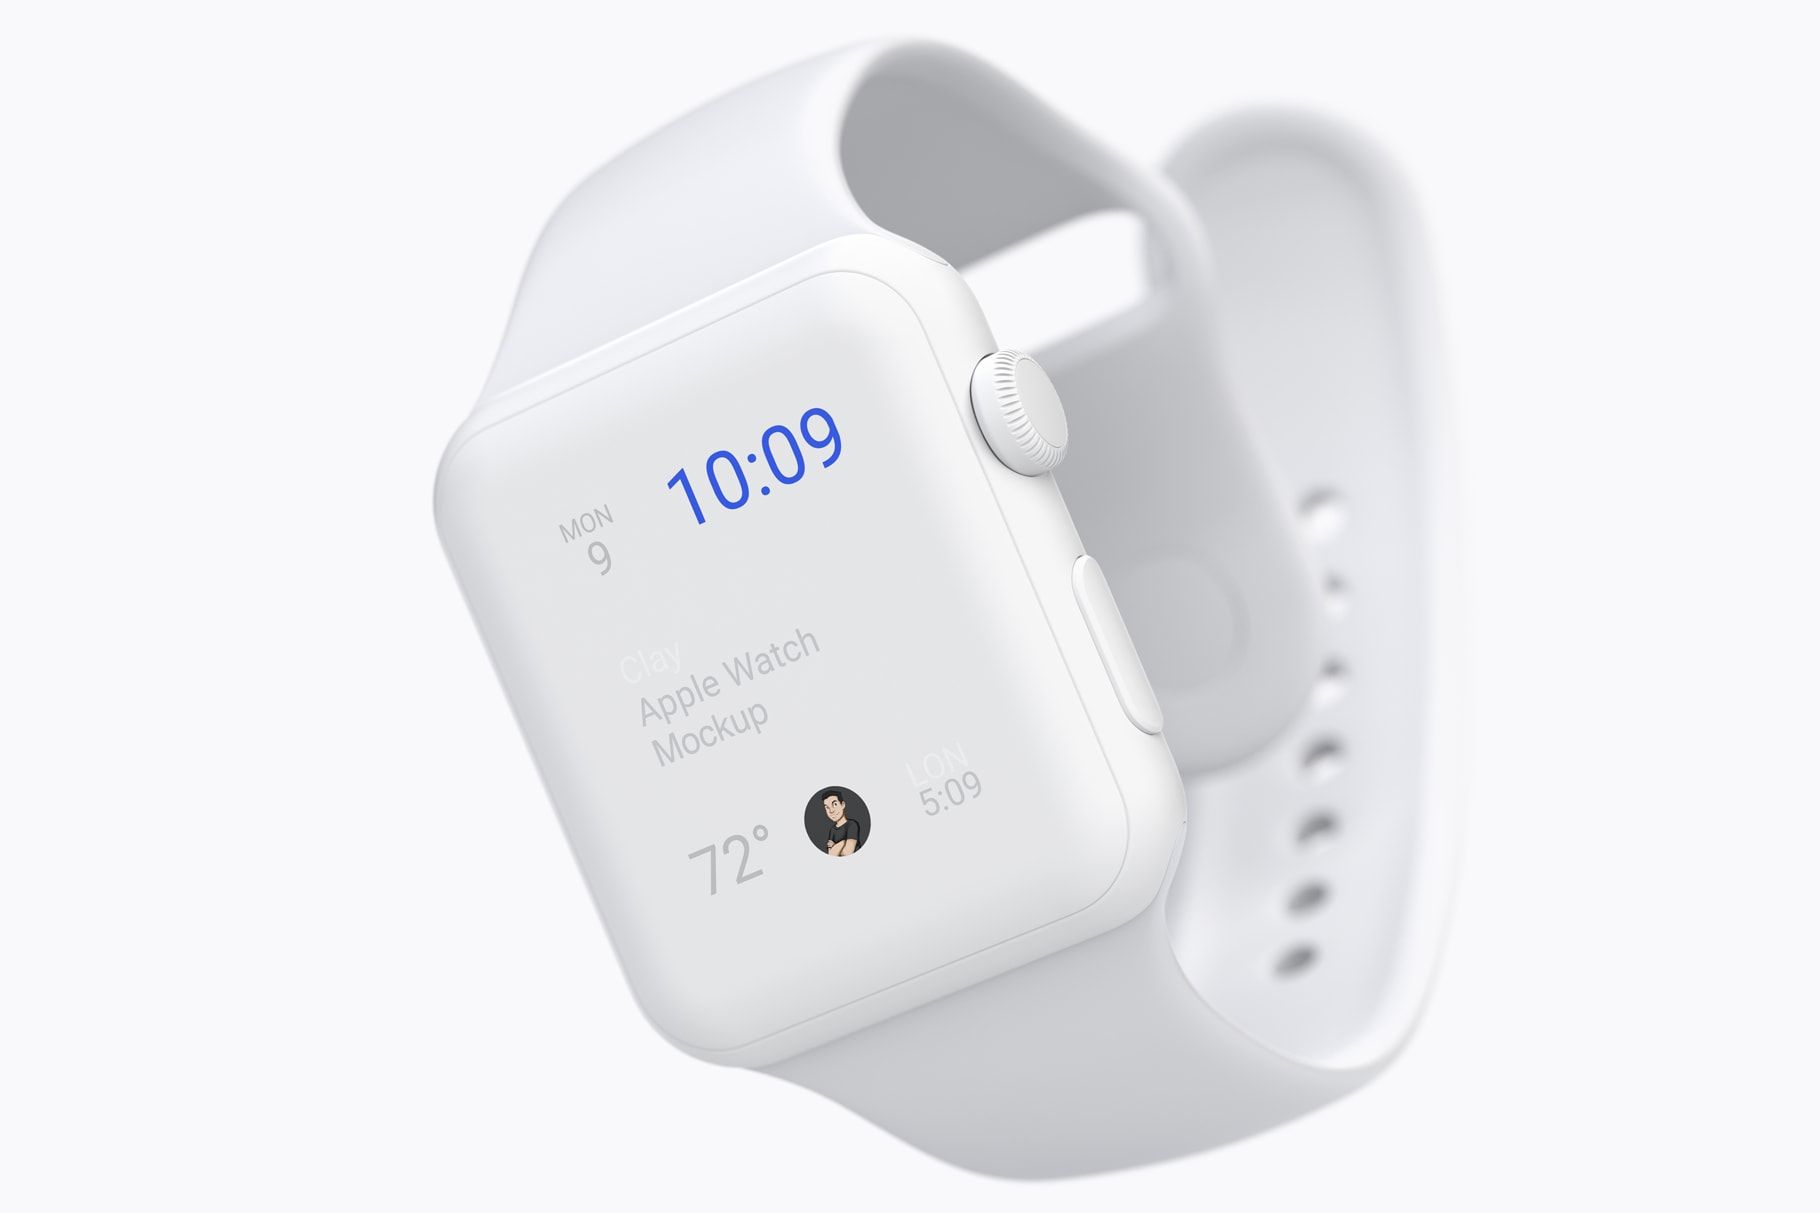 Clay Apple Watch Mockup to Present Watchos Apps